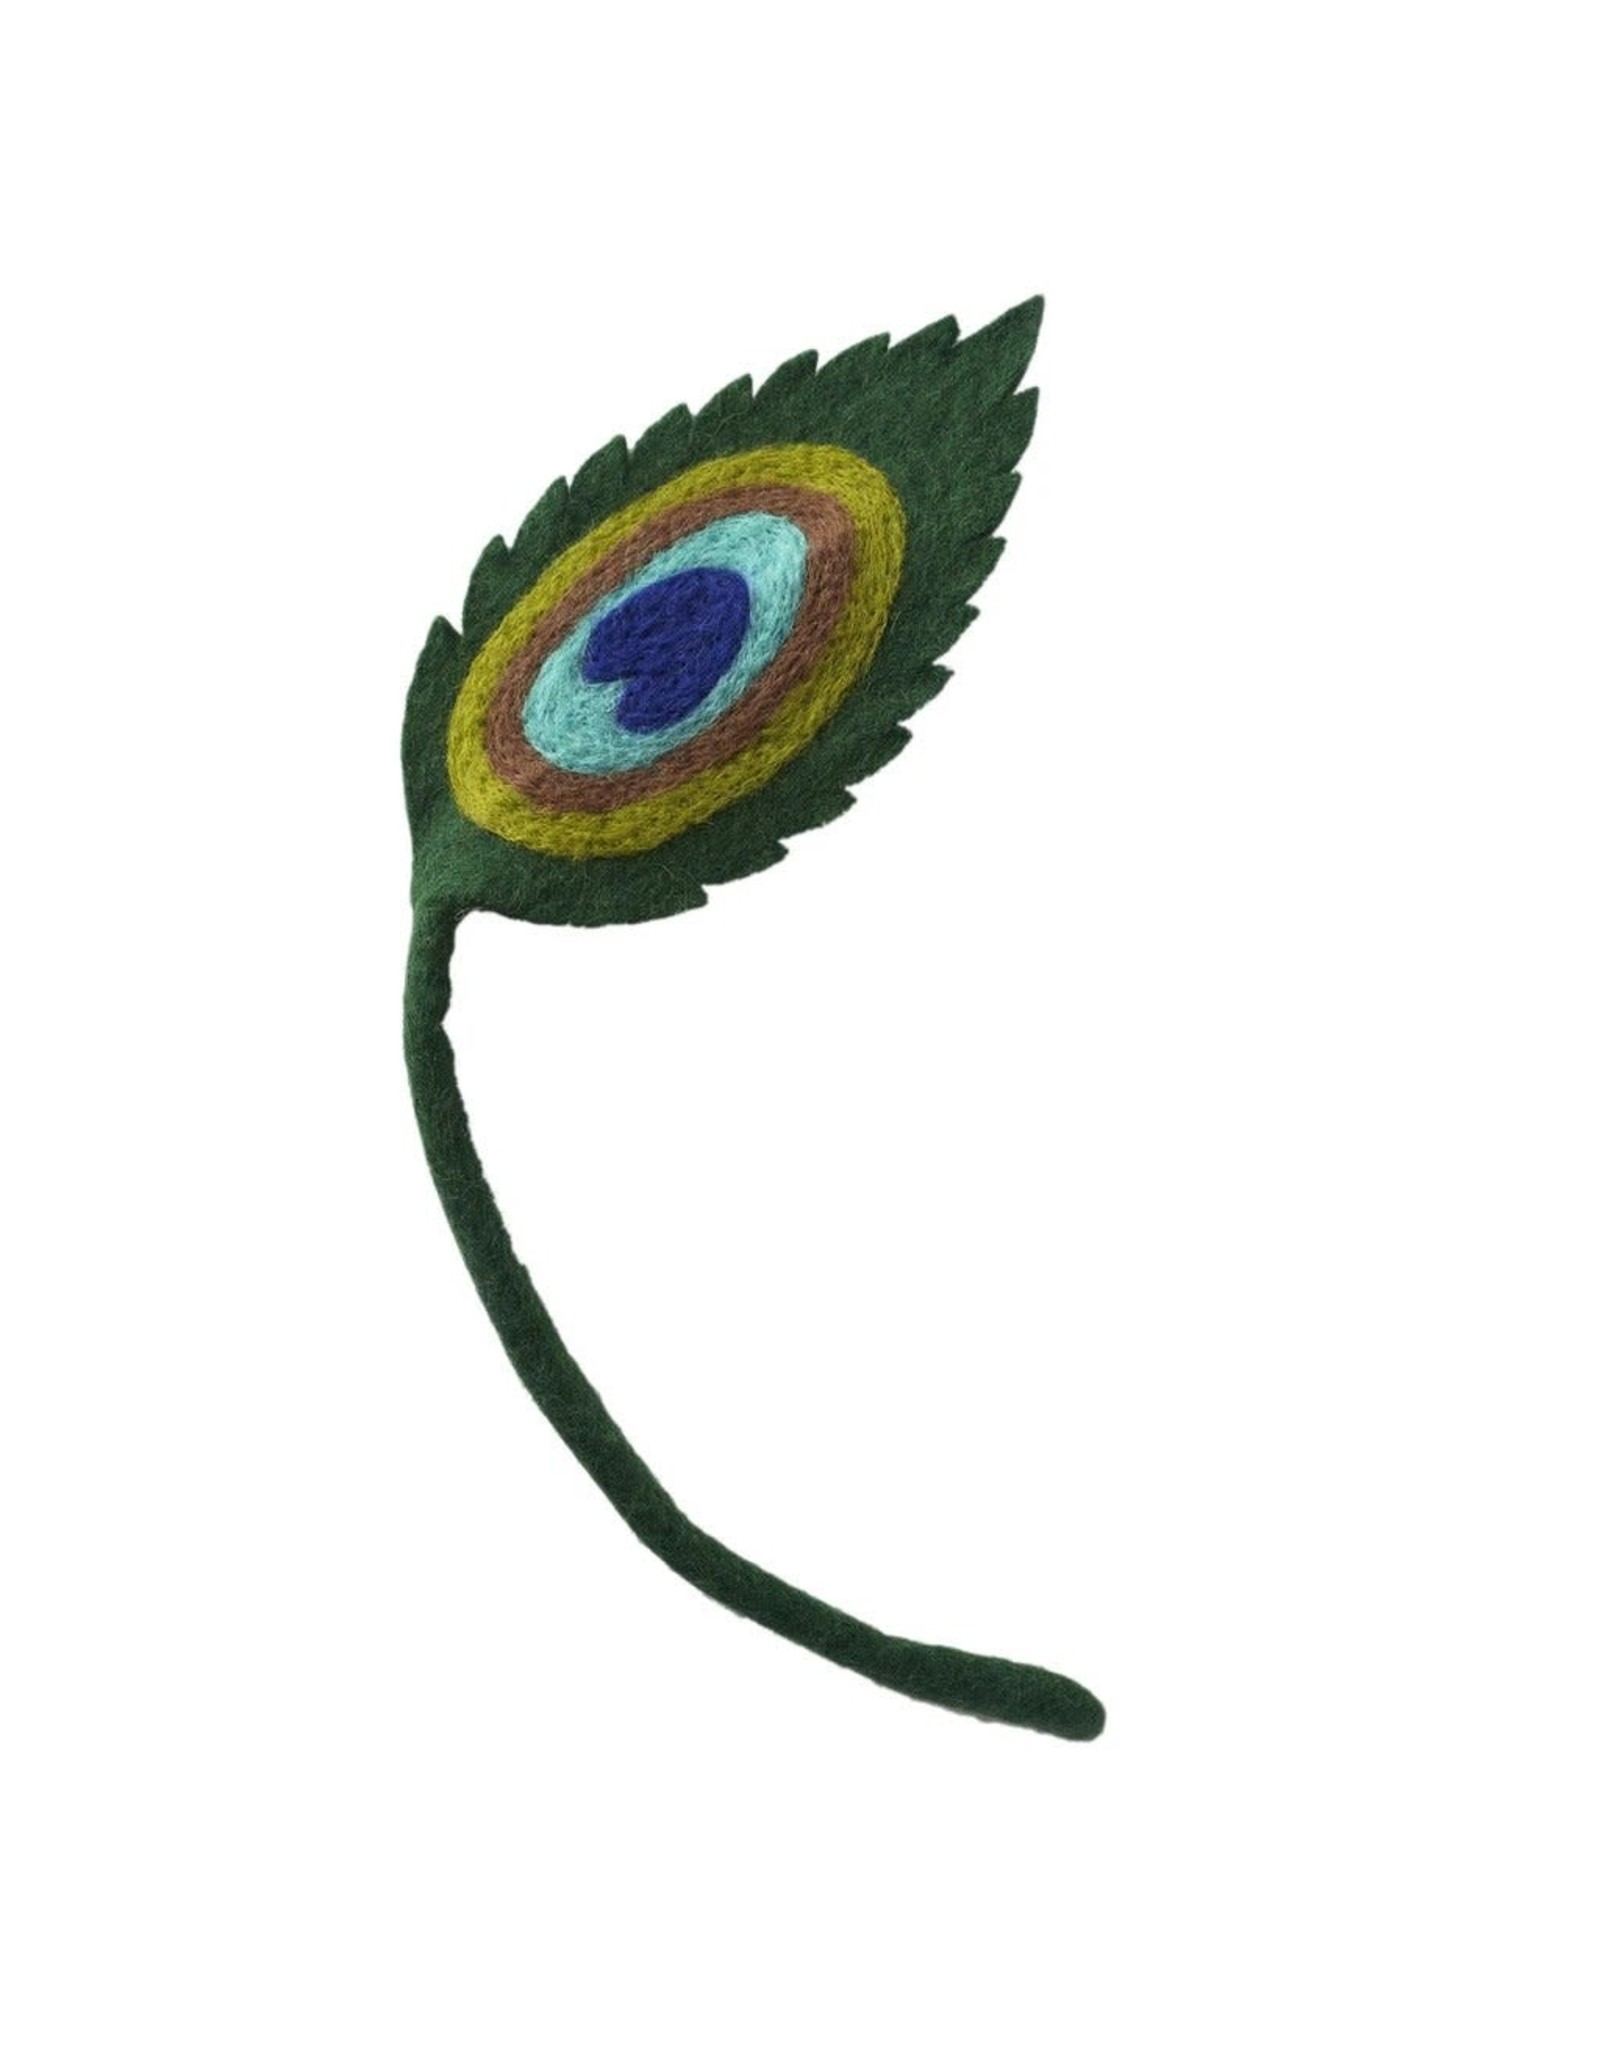 Trade roots Felt Peacock Leaf, Forest Green, Nepal